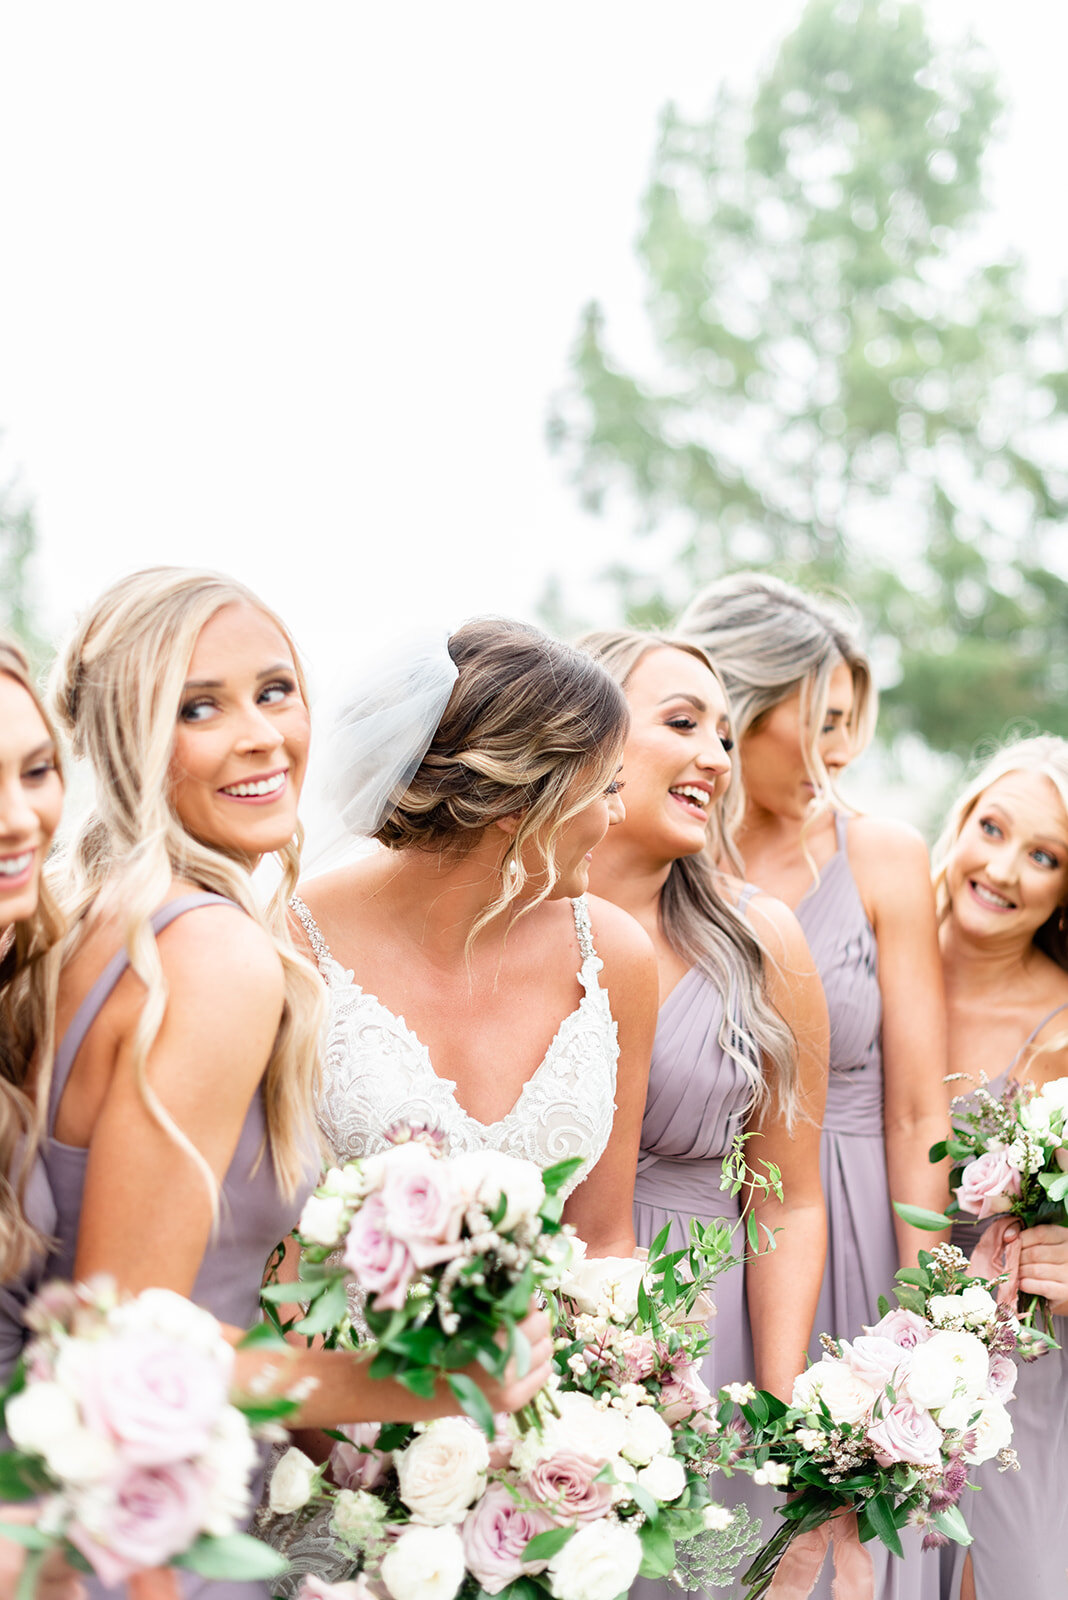 denise and bryan photography boise and mccall wedding photographers still water hollow-bride-bridesmaids.jpg